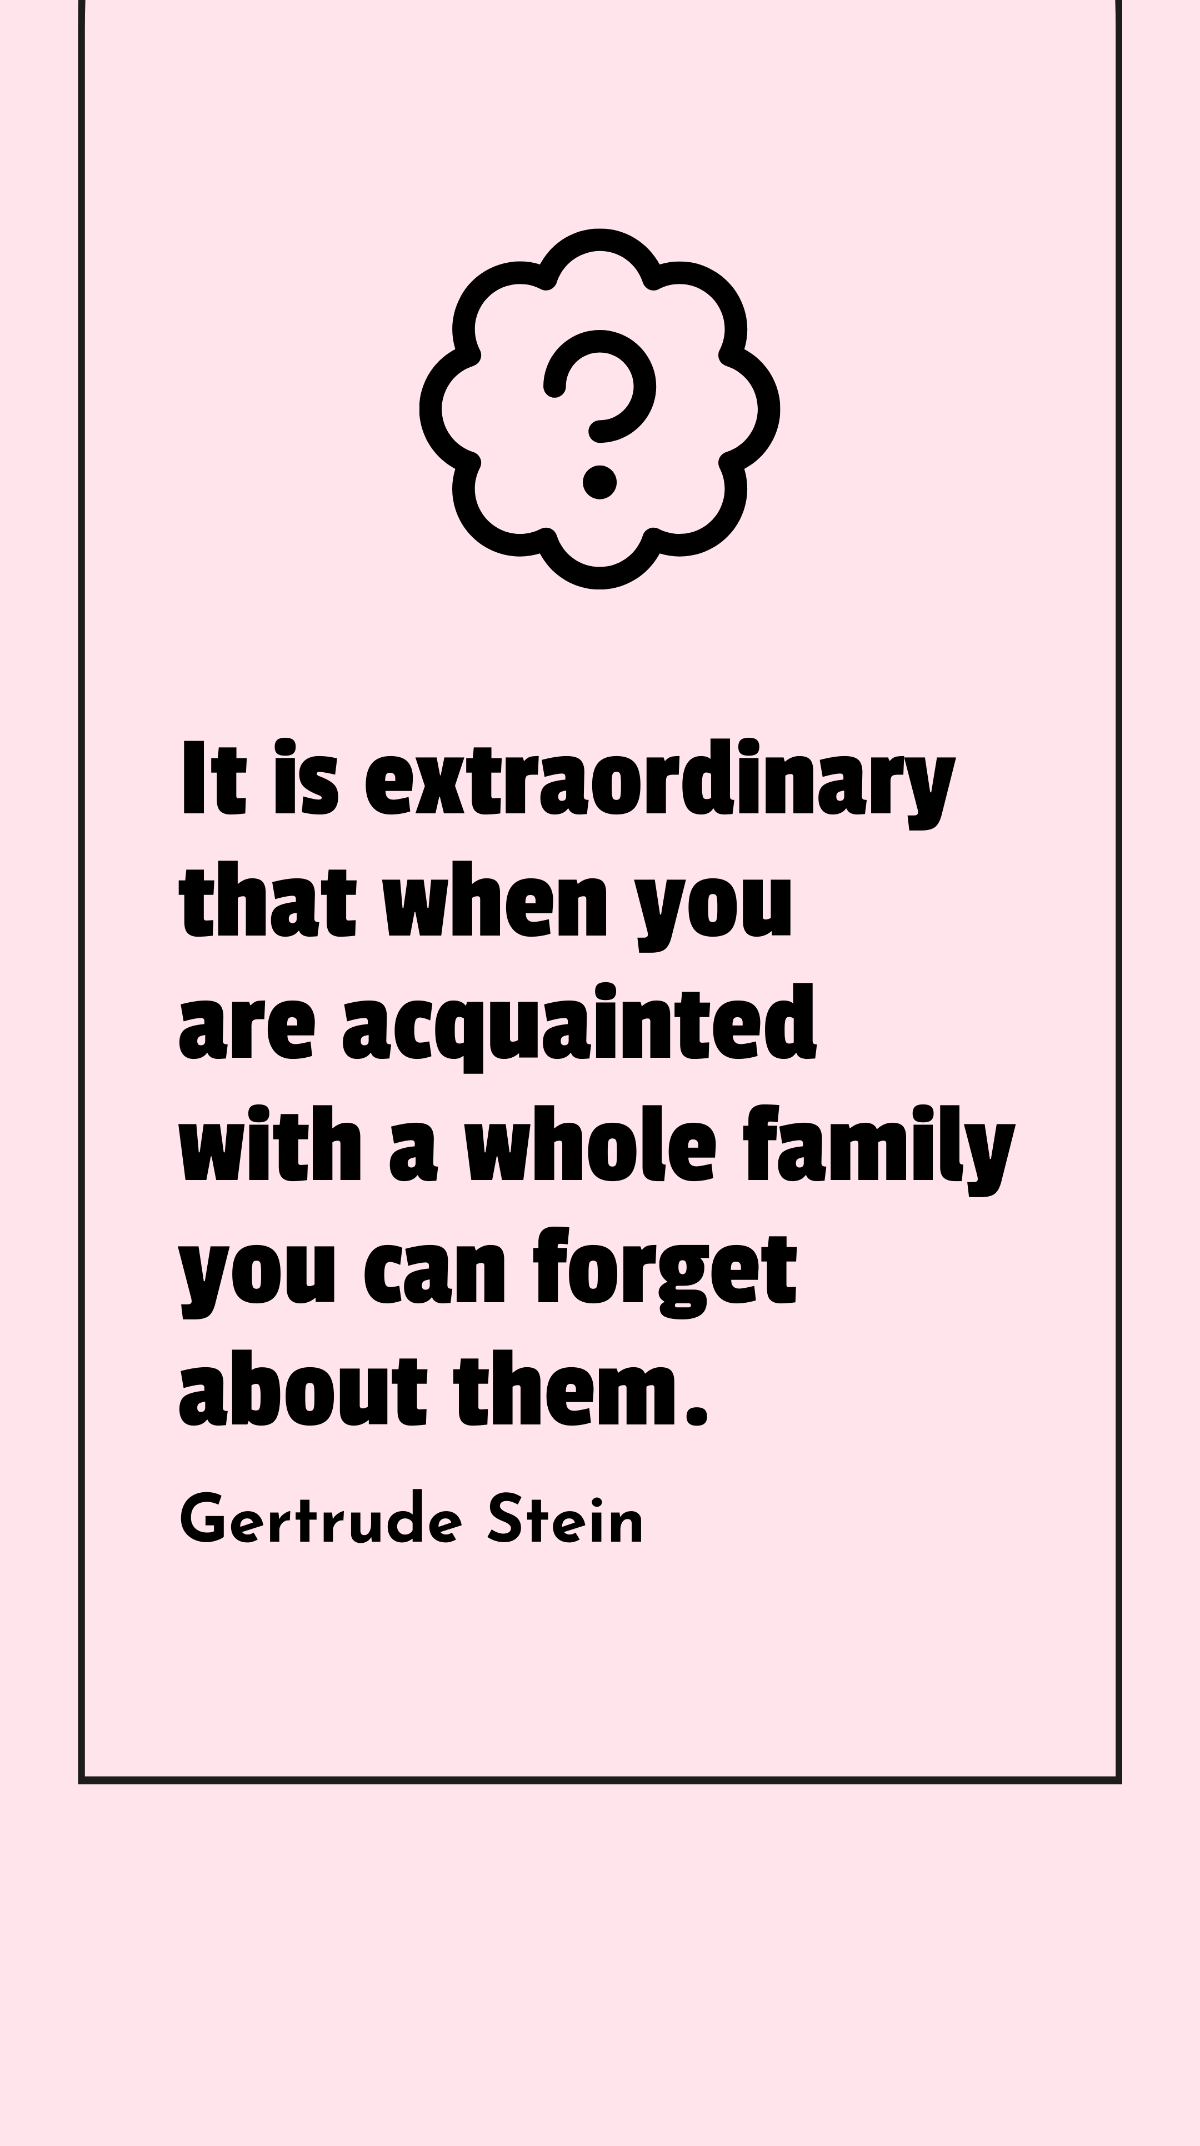 Free Gertrude Stein - It is extraordinary that when you are acquainted with a whole family you can forget about them. Template